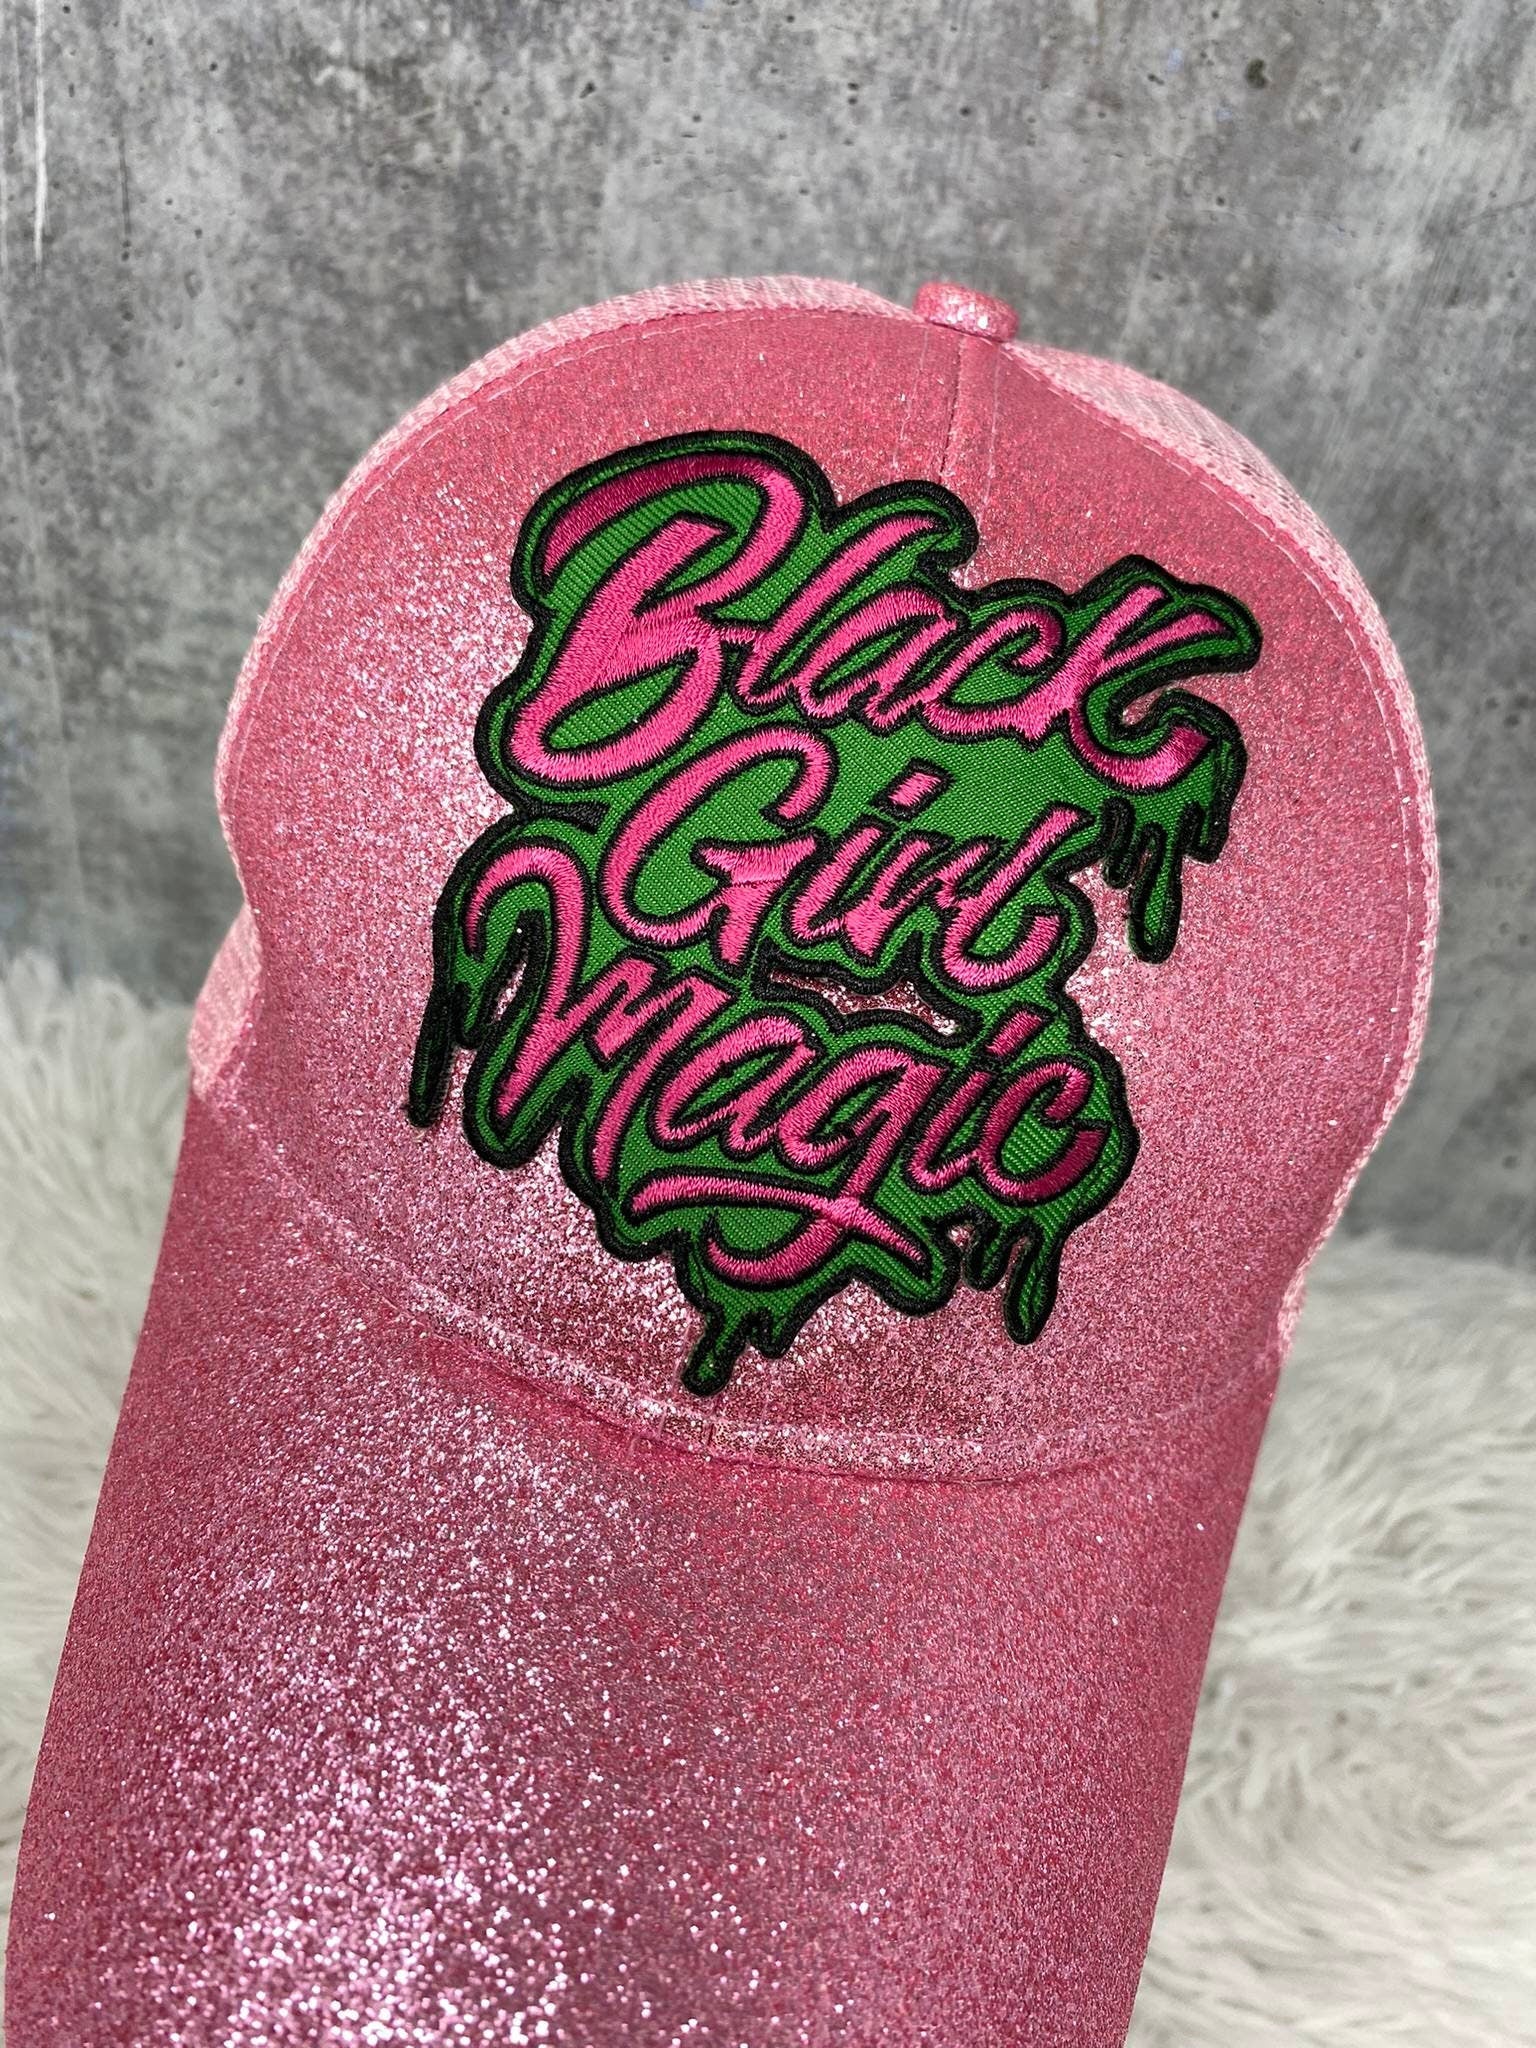 Pink & Green, Drippin "Black Girl Magic" Glitter Messy Bun/Ponytail Hat, Bad Hair Day Hat, Gifts for Sorority Girl, Cute Summer Hat w/Patch